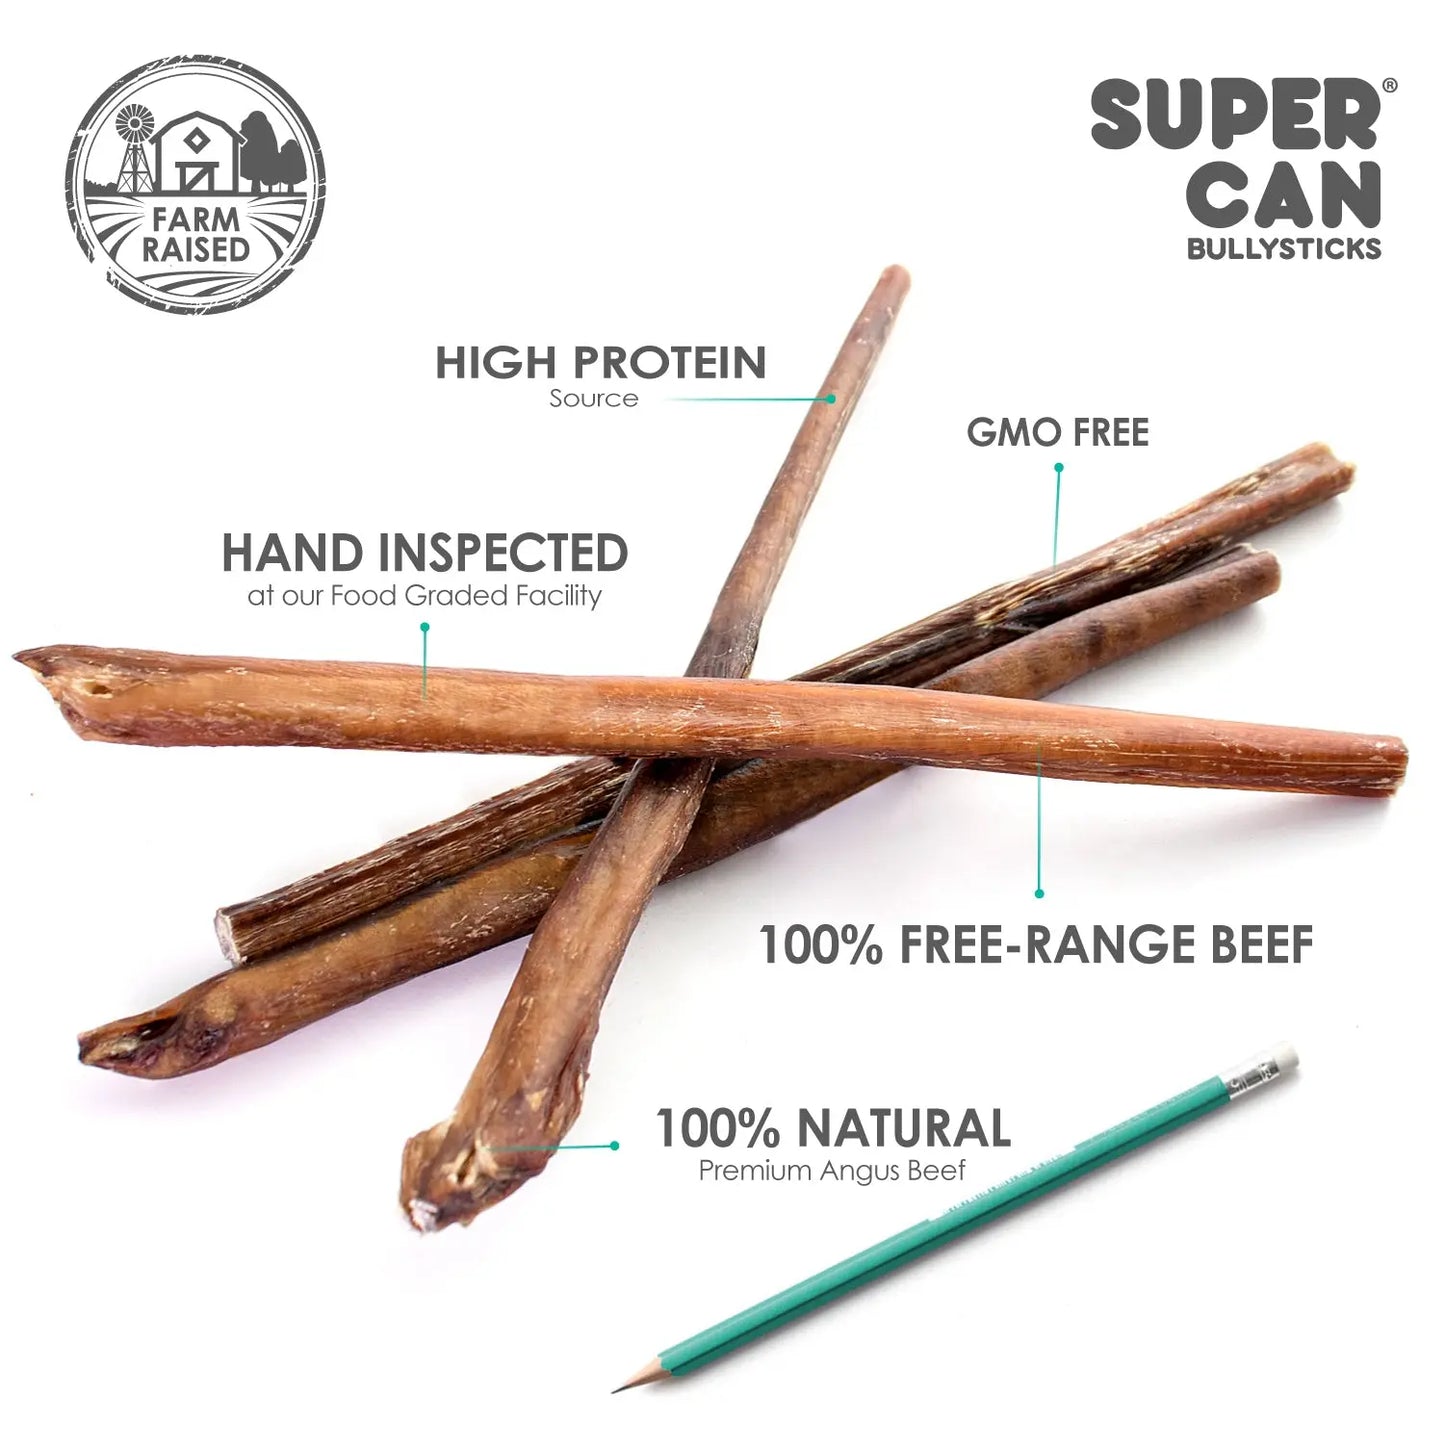 Supercan 12 inch Standard Odor Free Bully Sticks Case of 50 Supercan